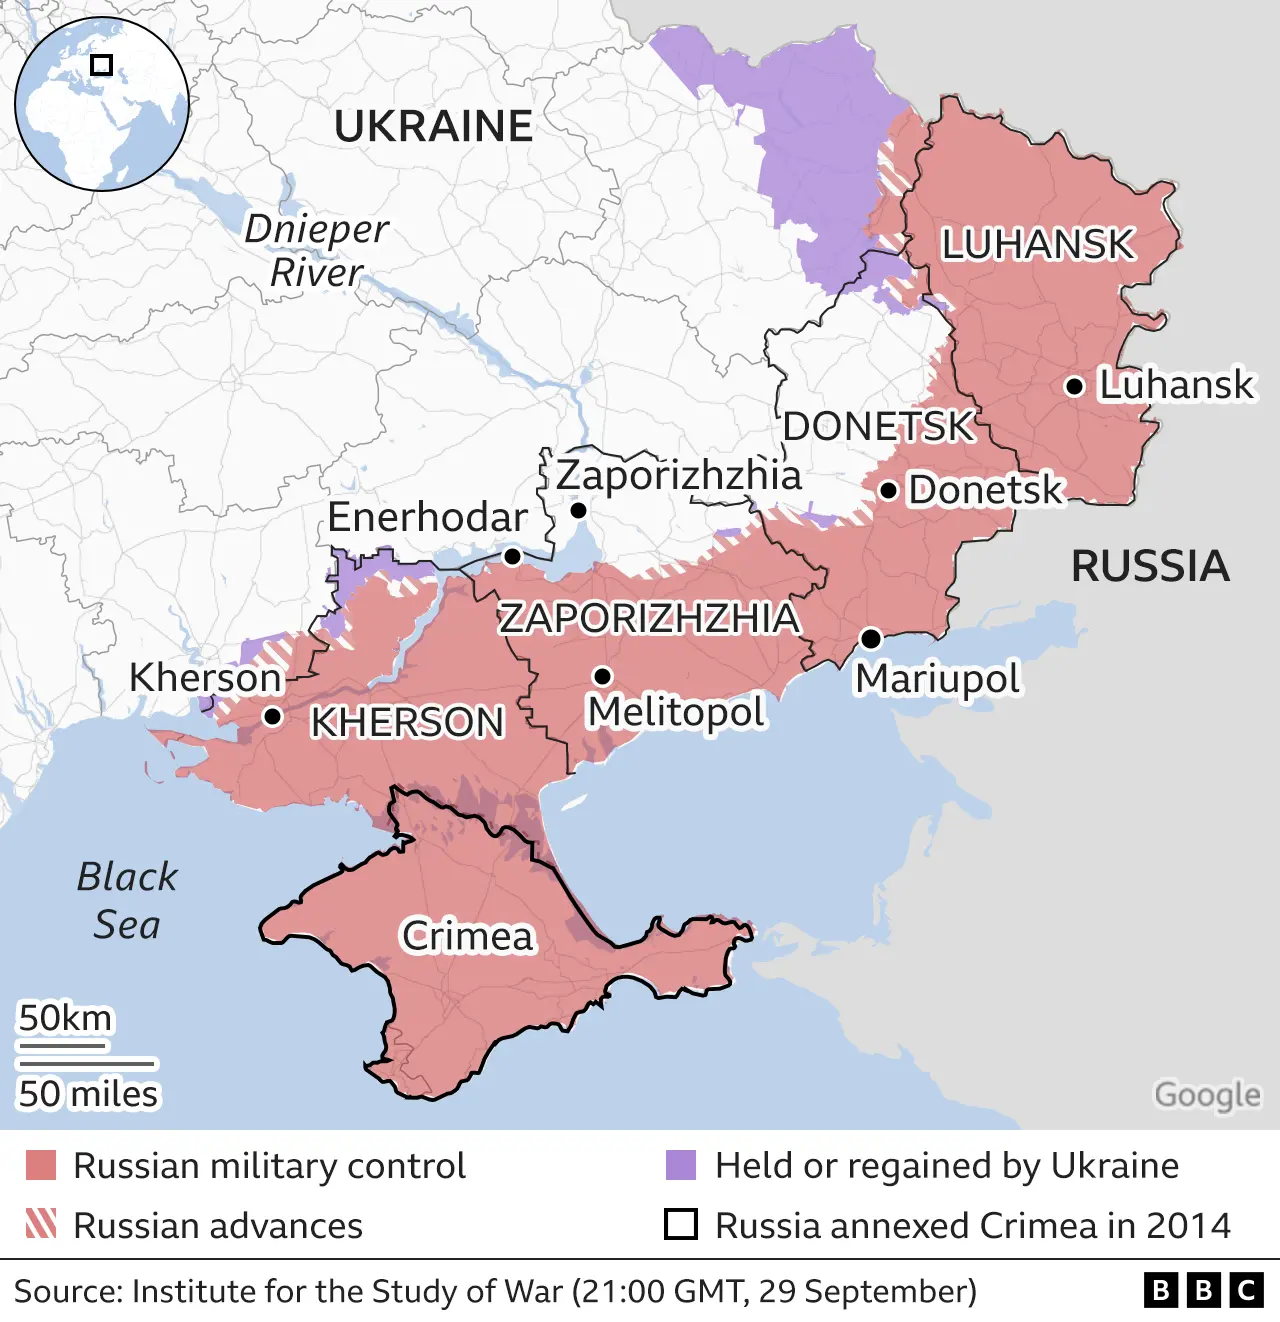 What areas are annexed by Russia?